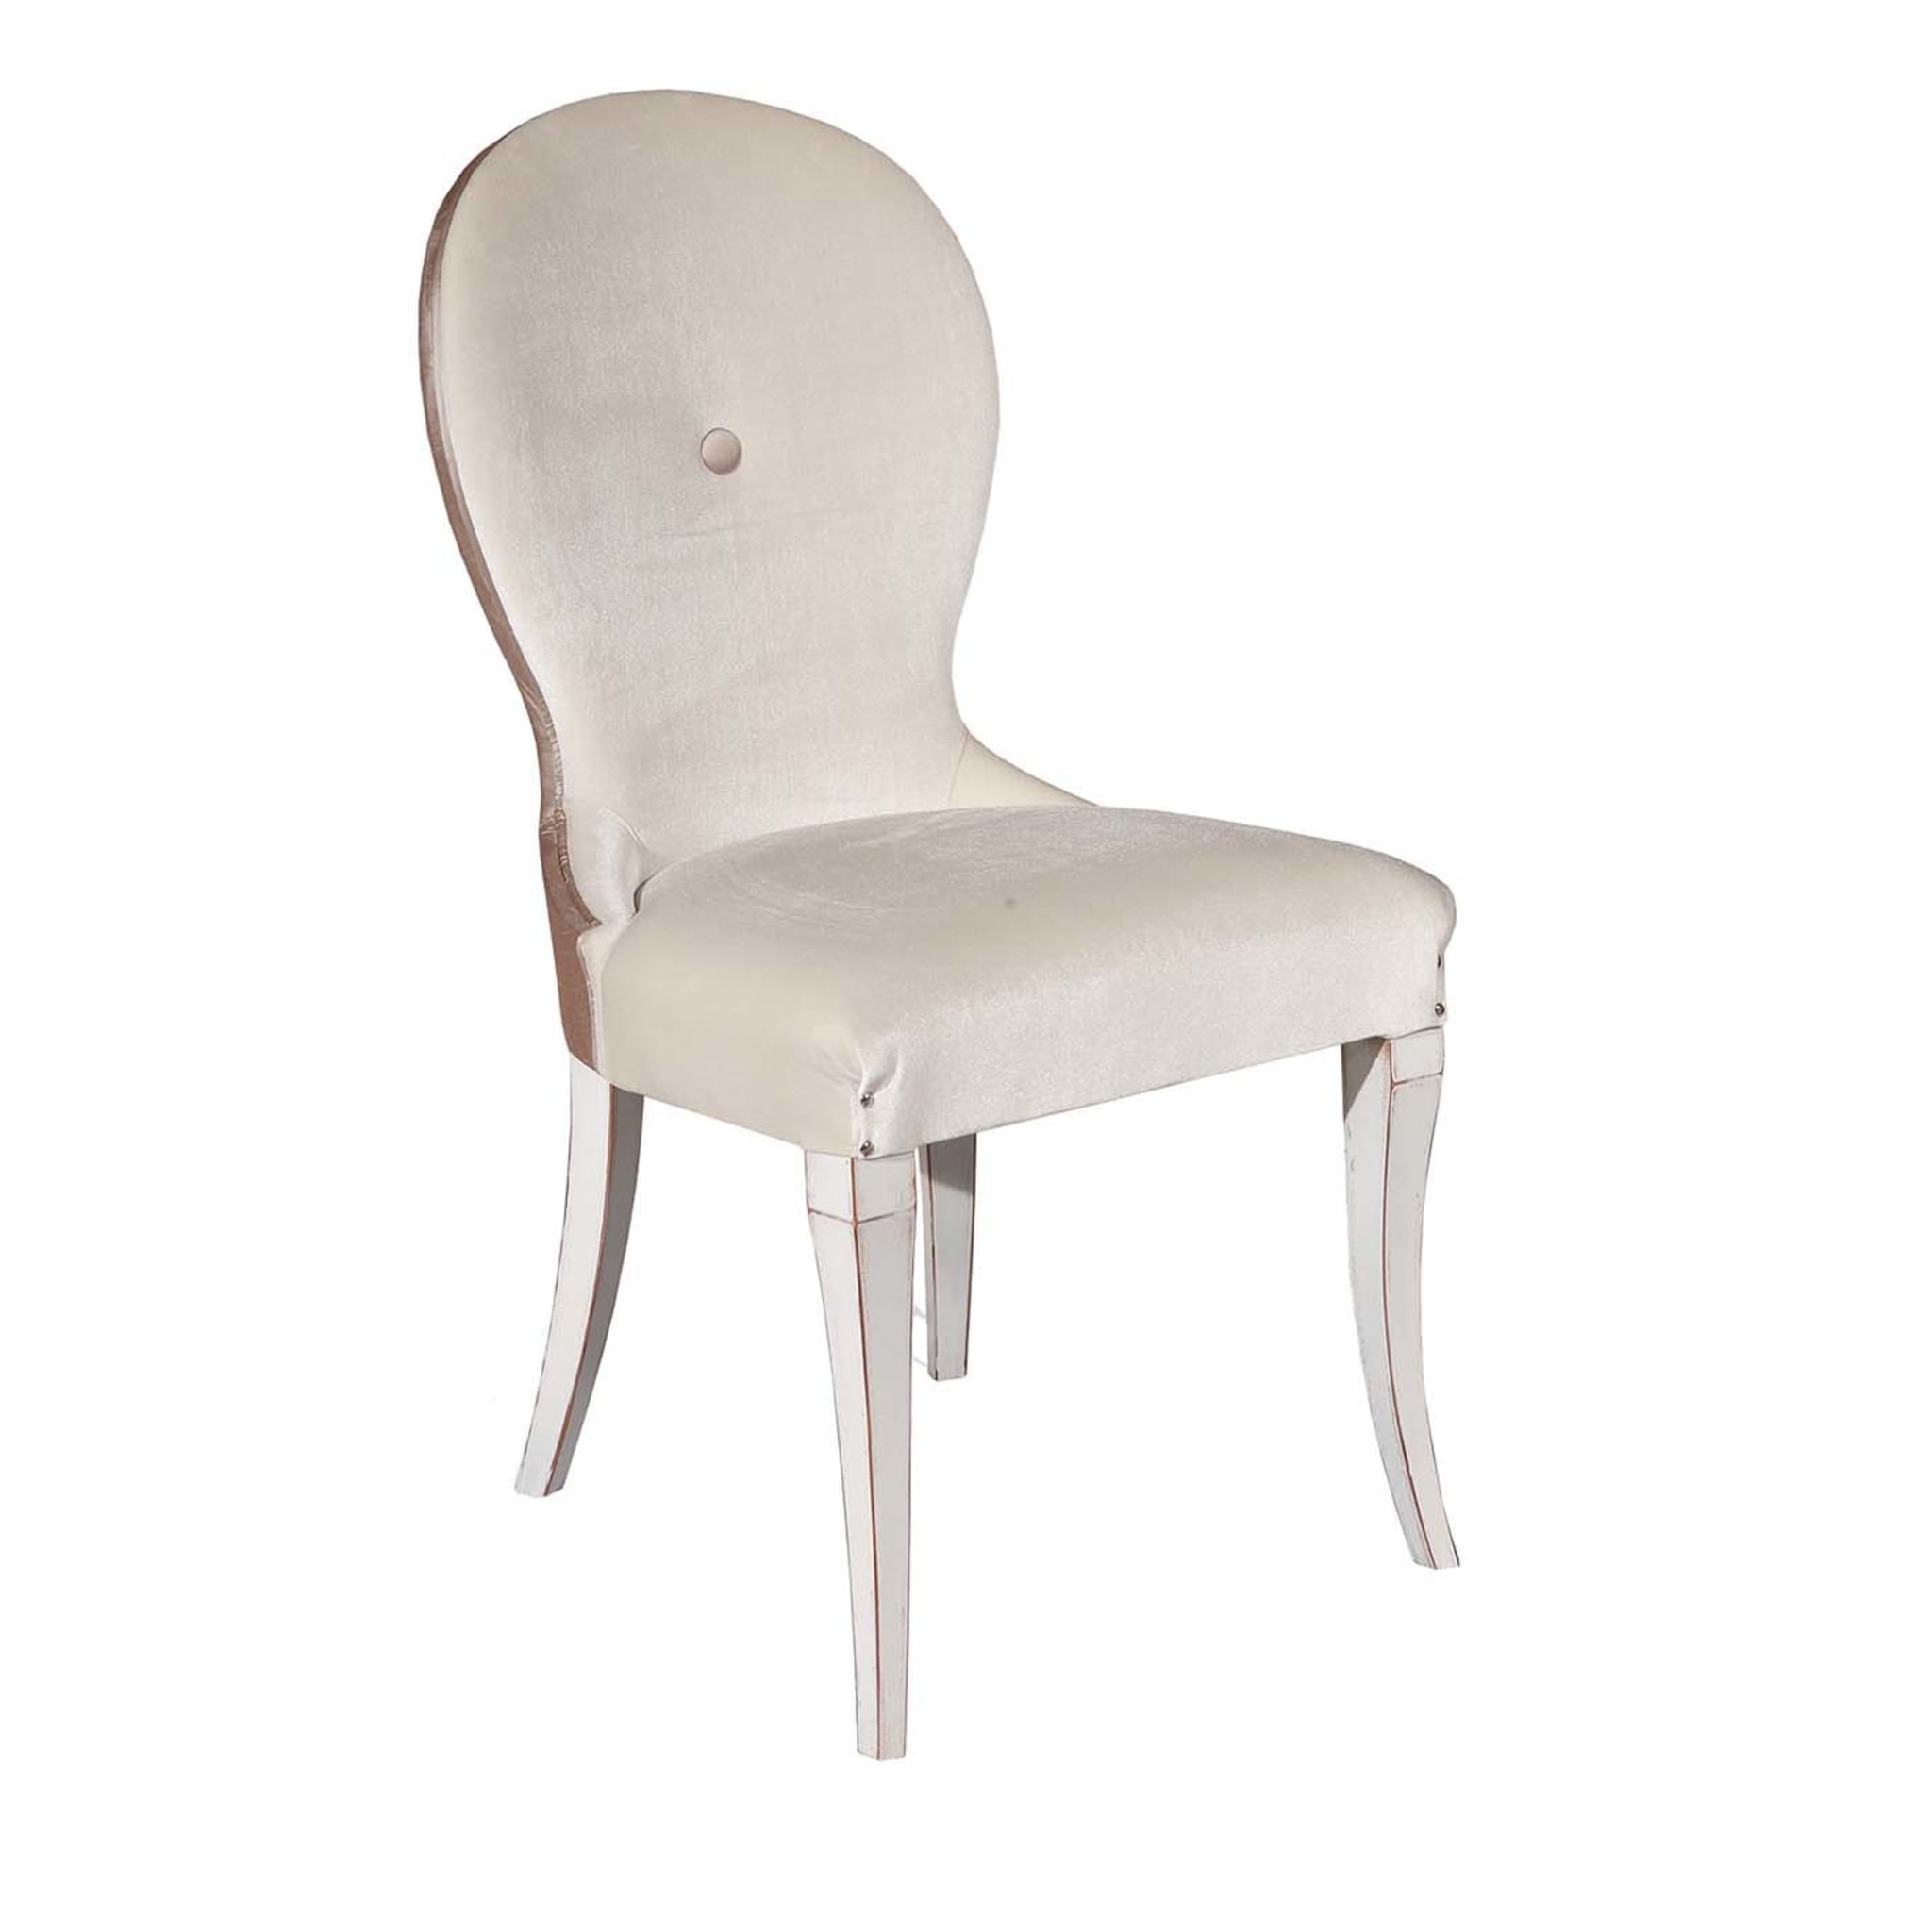 Distressed White Chair - Main view